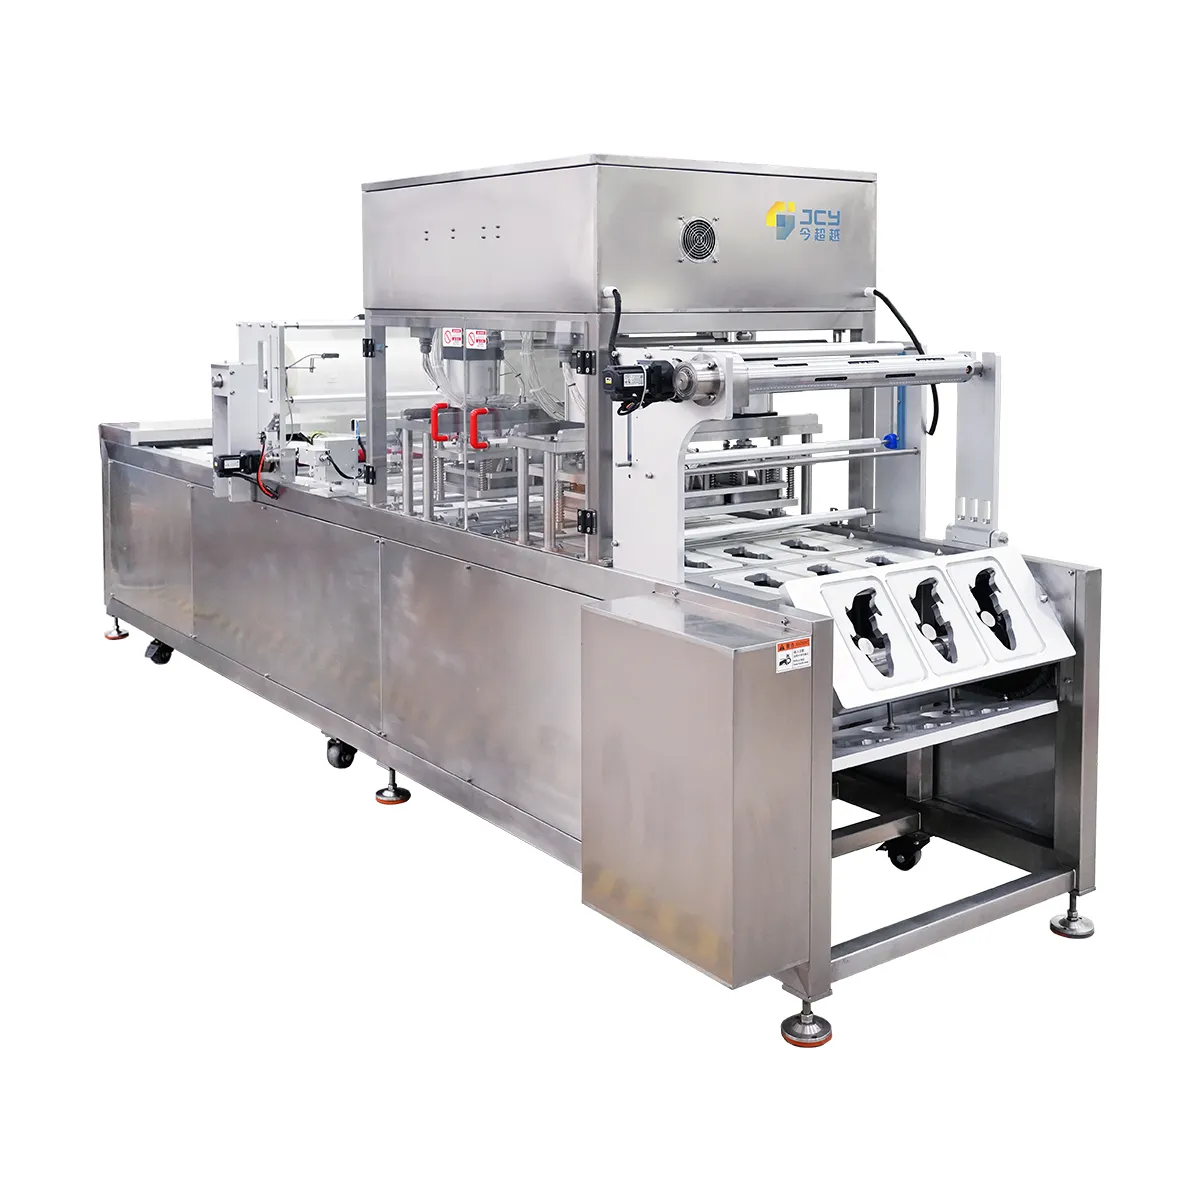 Fully automatic continuous carton sealing and packaging machine